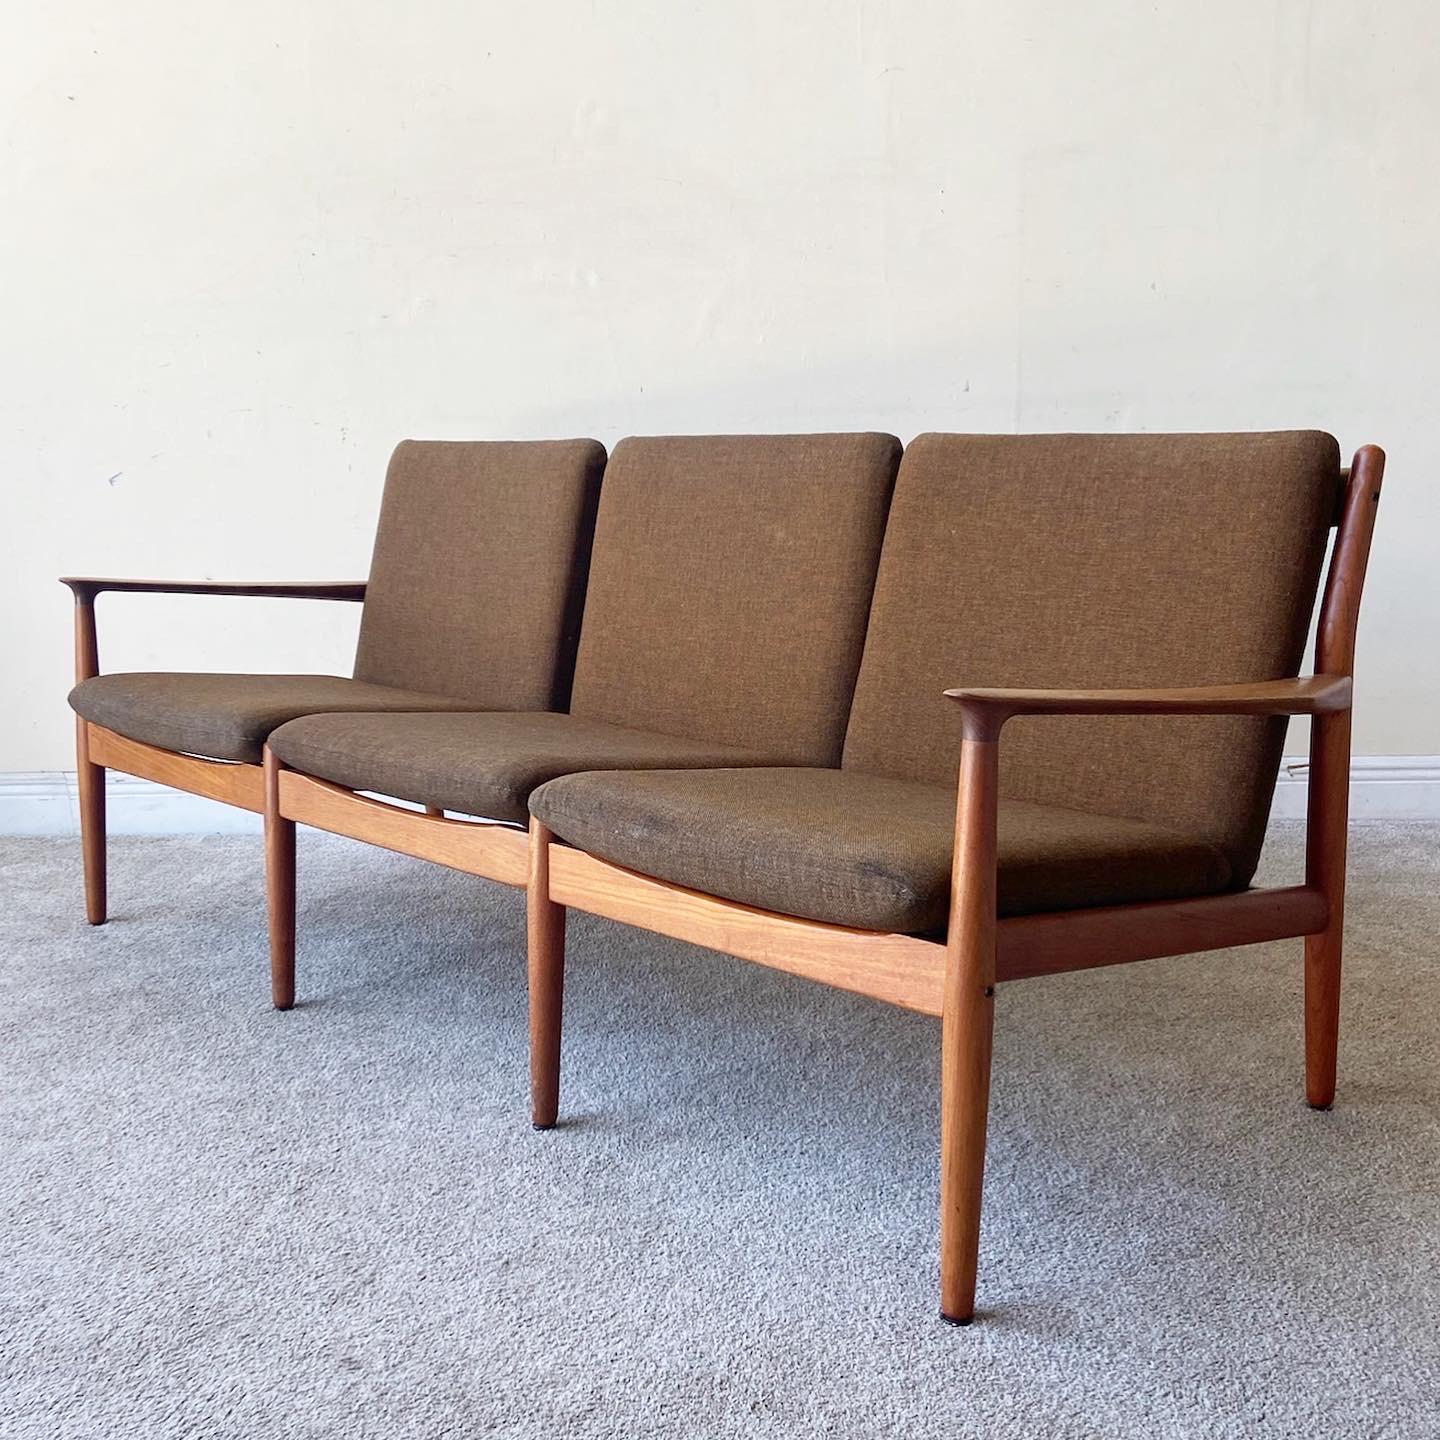 Fantastic Arne Vodder Chaise lounge set for Glostrup from the 1960s. All parts are original including the seat cushions. Set features a three cushion couch with two arm chairs.

Chair measures: 28.5